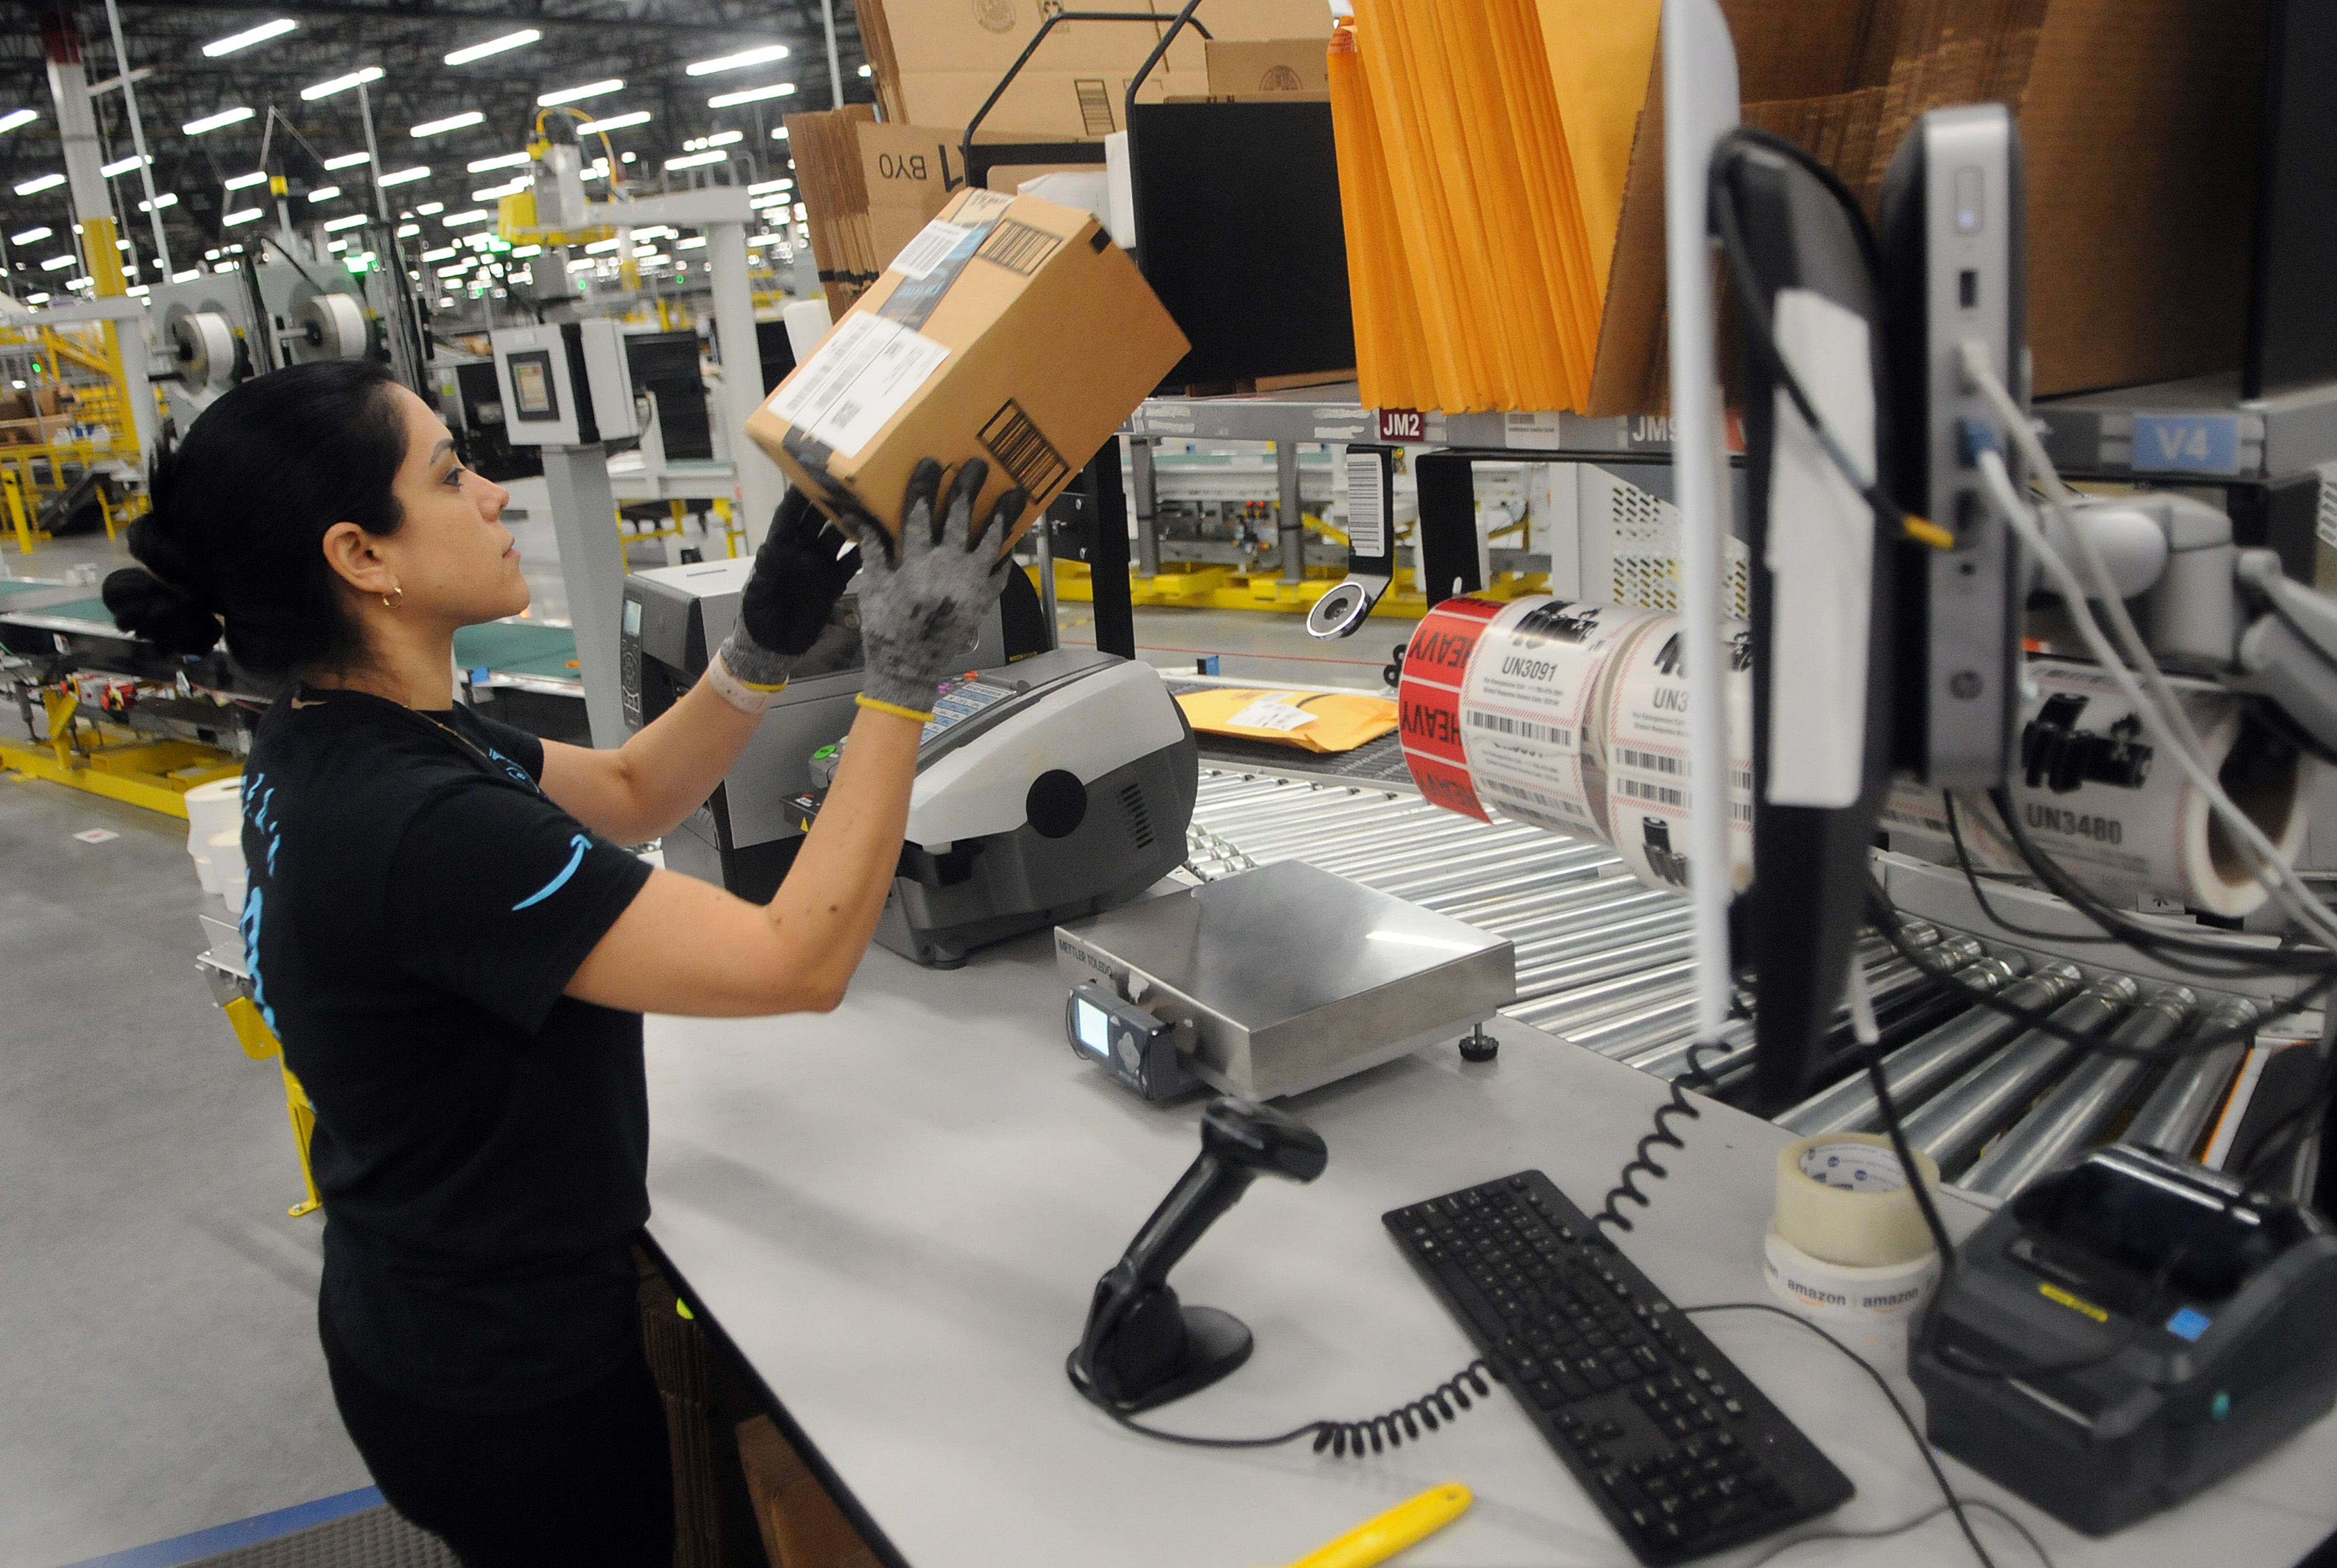 Amazon warehouse workers walk up to 12 miles per day.